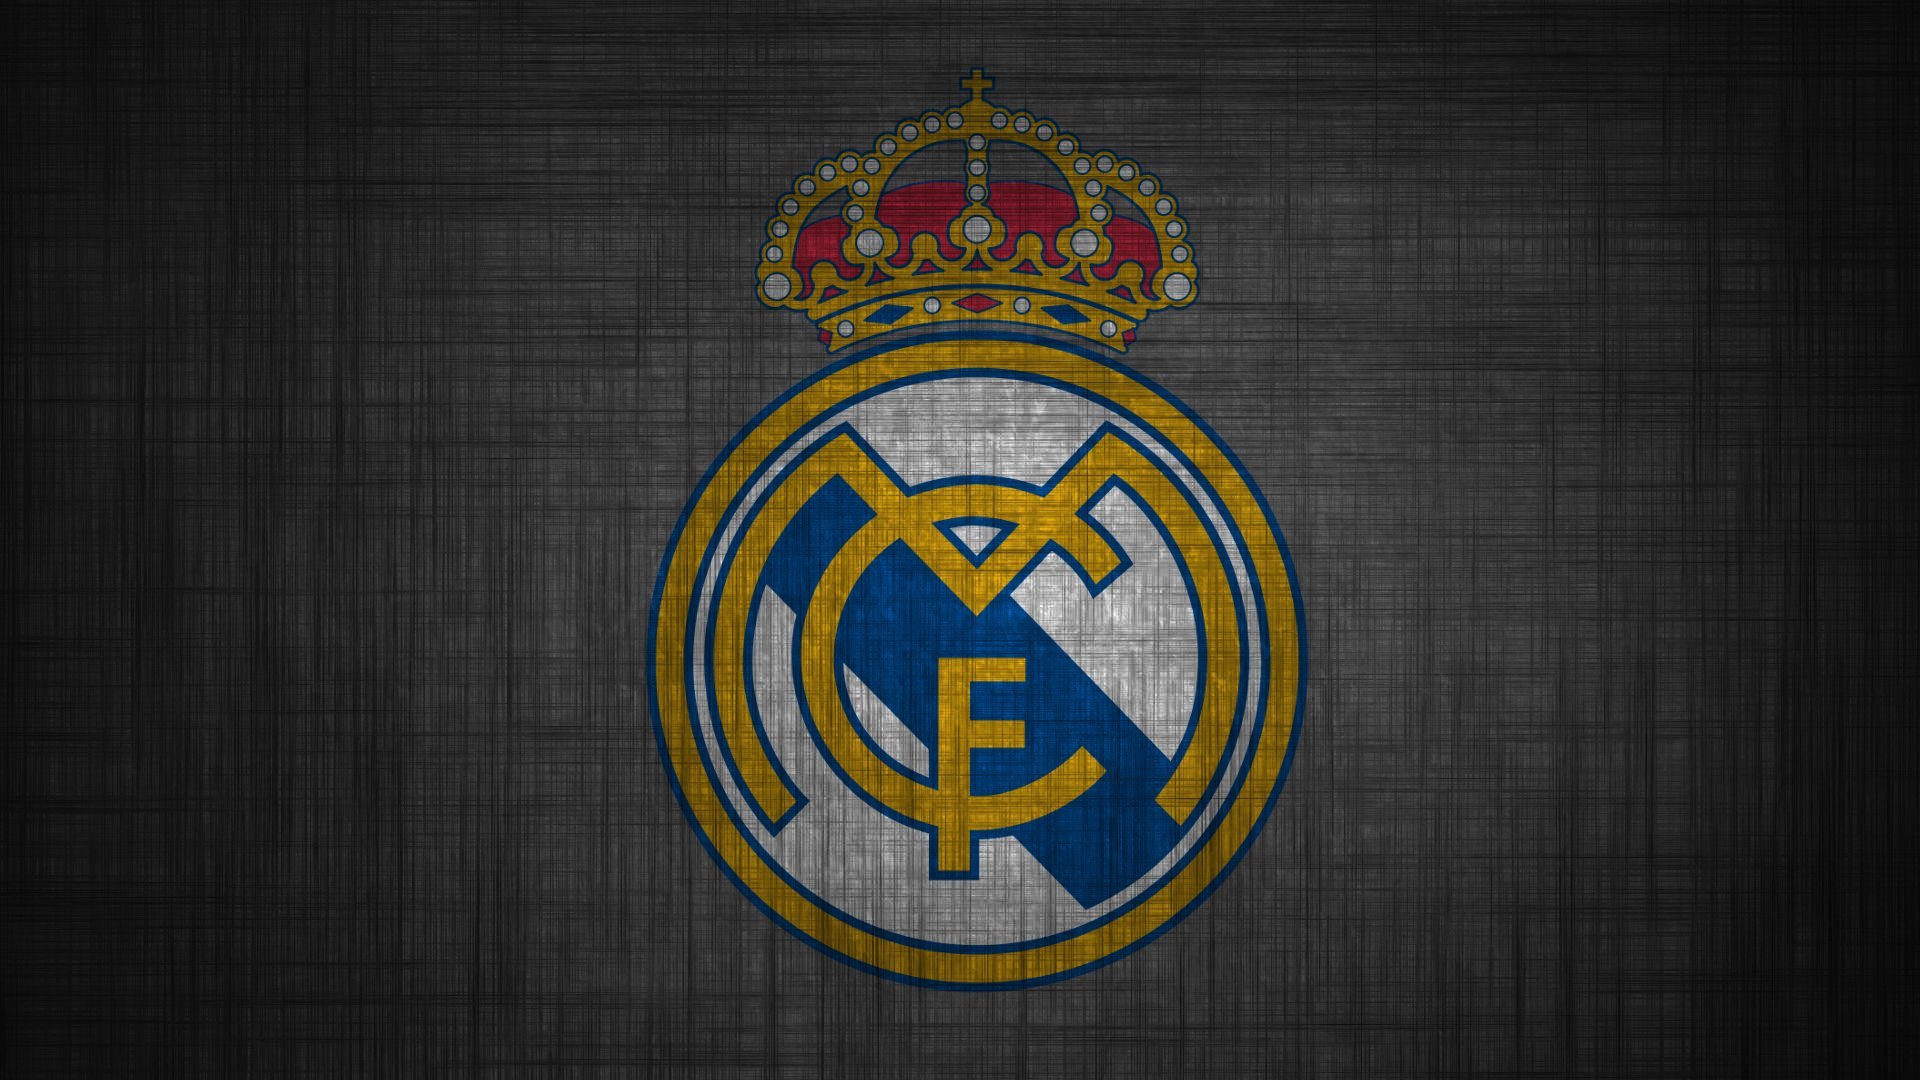 Best Real Madrid C.F. wallpaper ID:100453 for High Resolution full hd 1080p computer